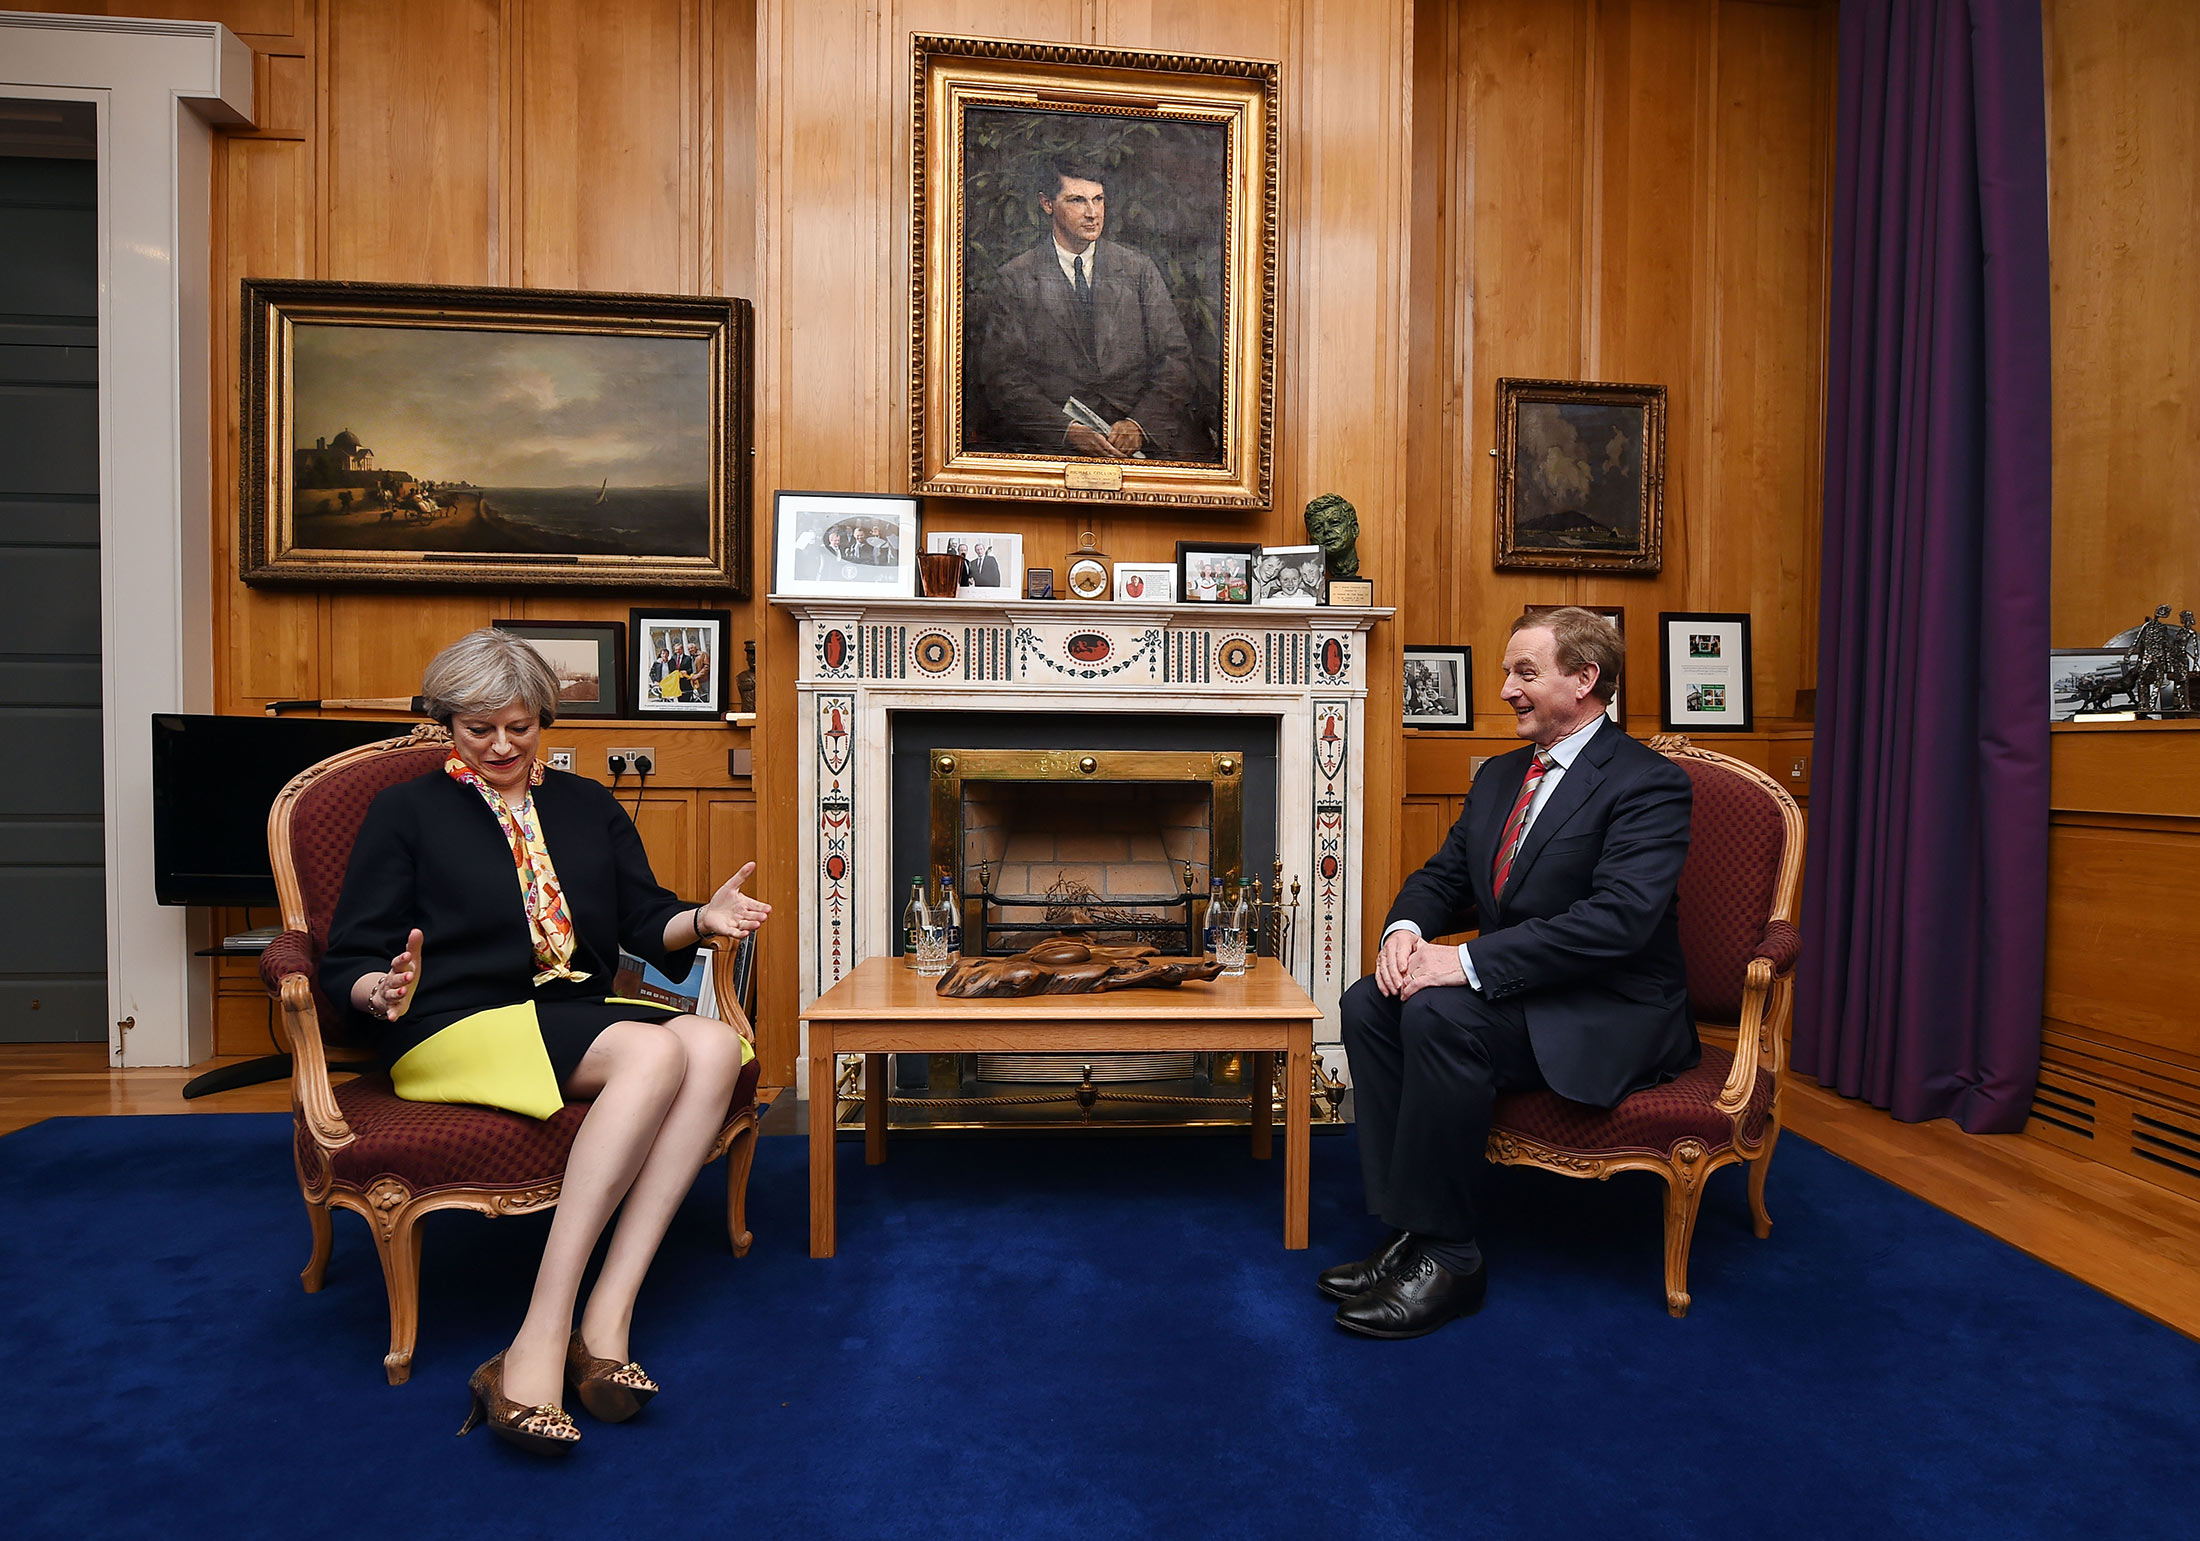 British Prime Minister Theresa May and&nbsp;Irish Taoiseach Enda Kenny in his office in Dublin, where a portrait of the Irish revolutionary Michael Collins hangs.